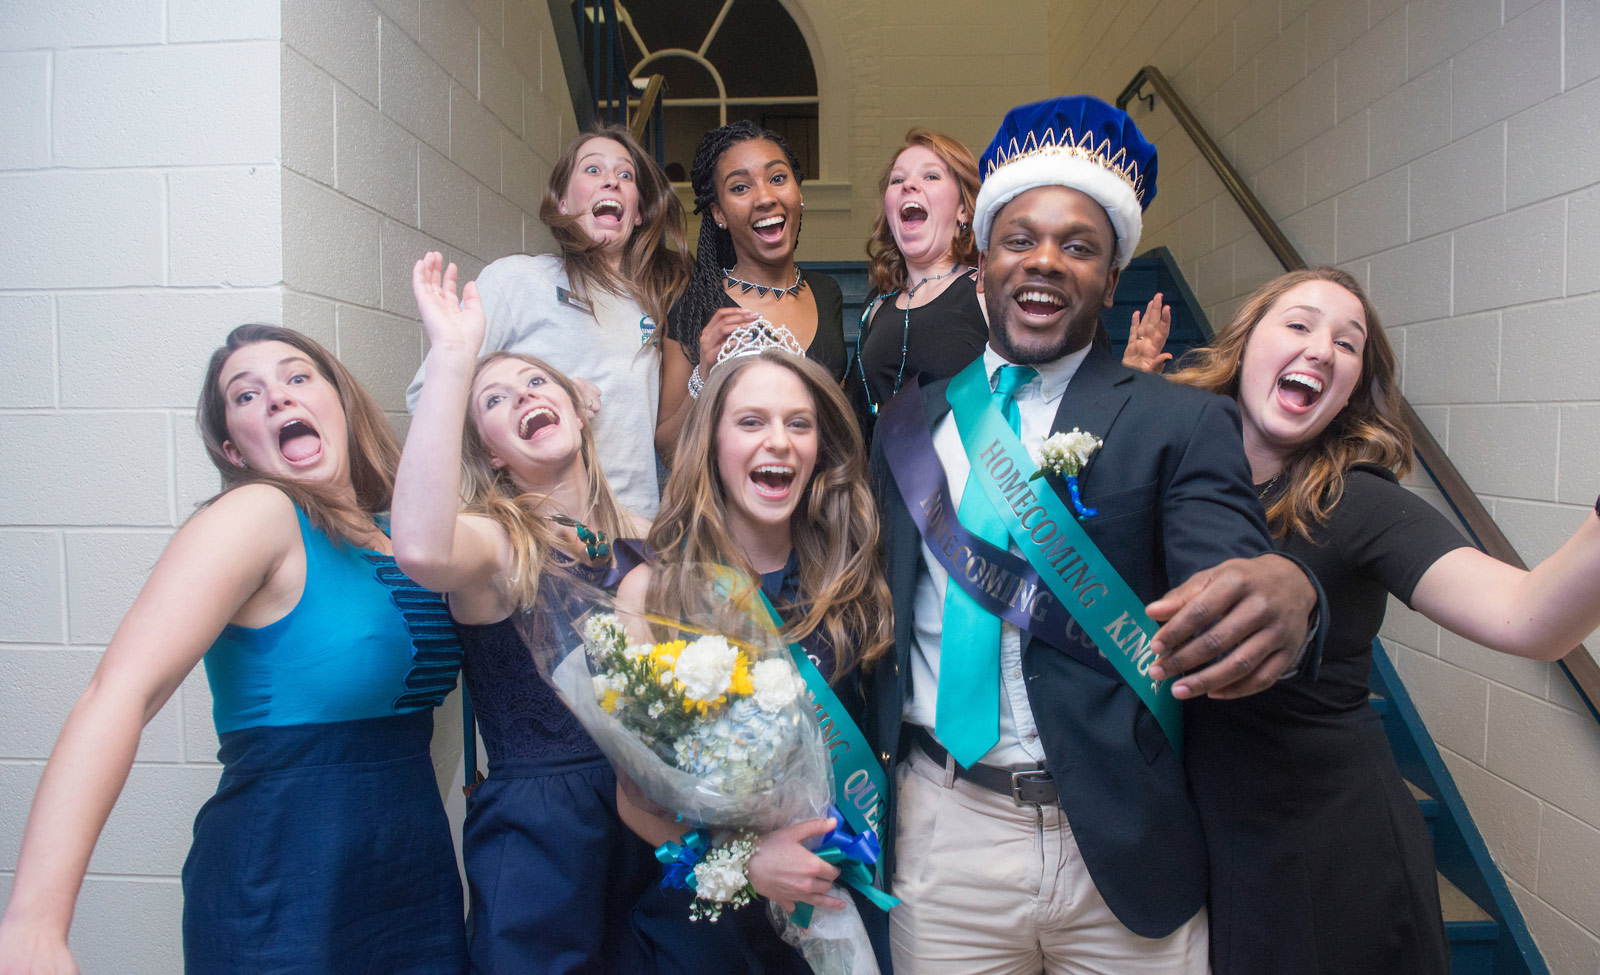 Homecoming king and queen in stairwell with other people